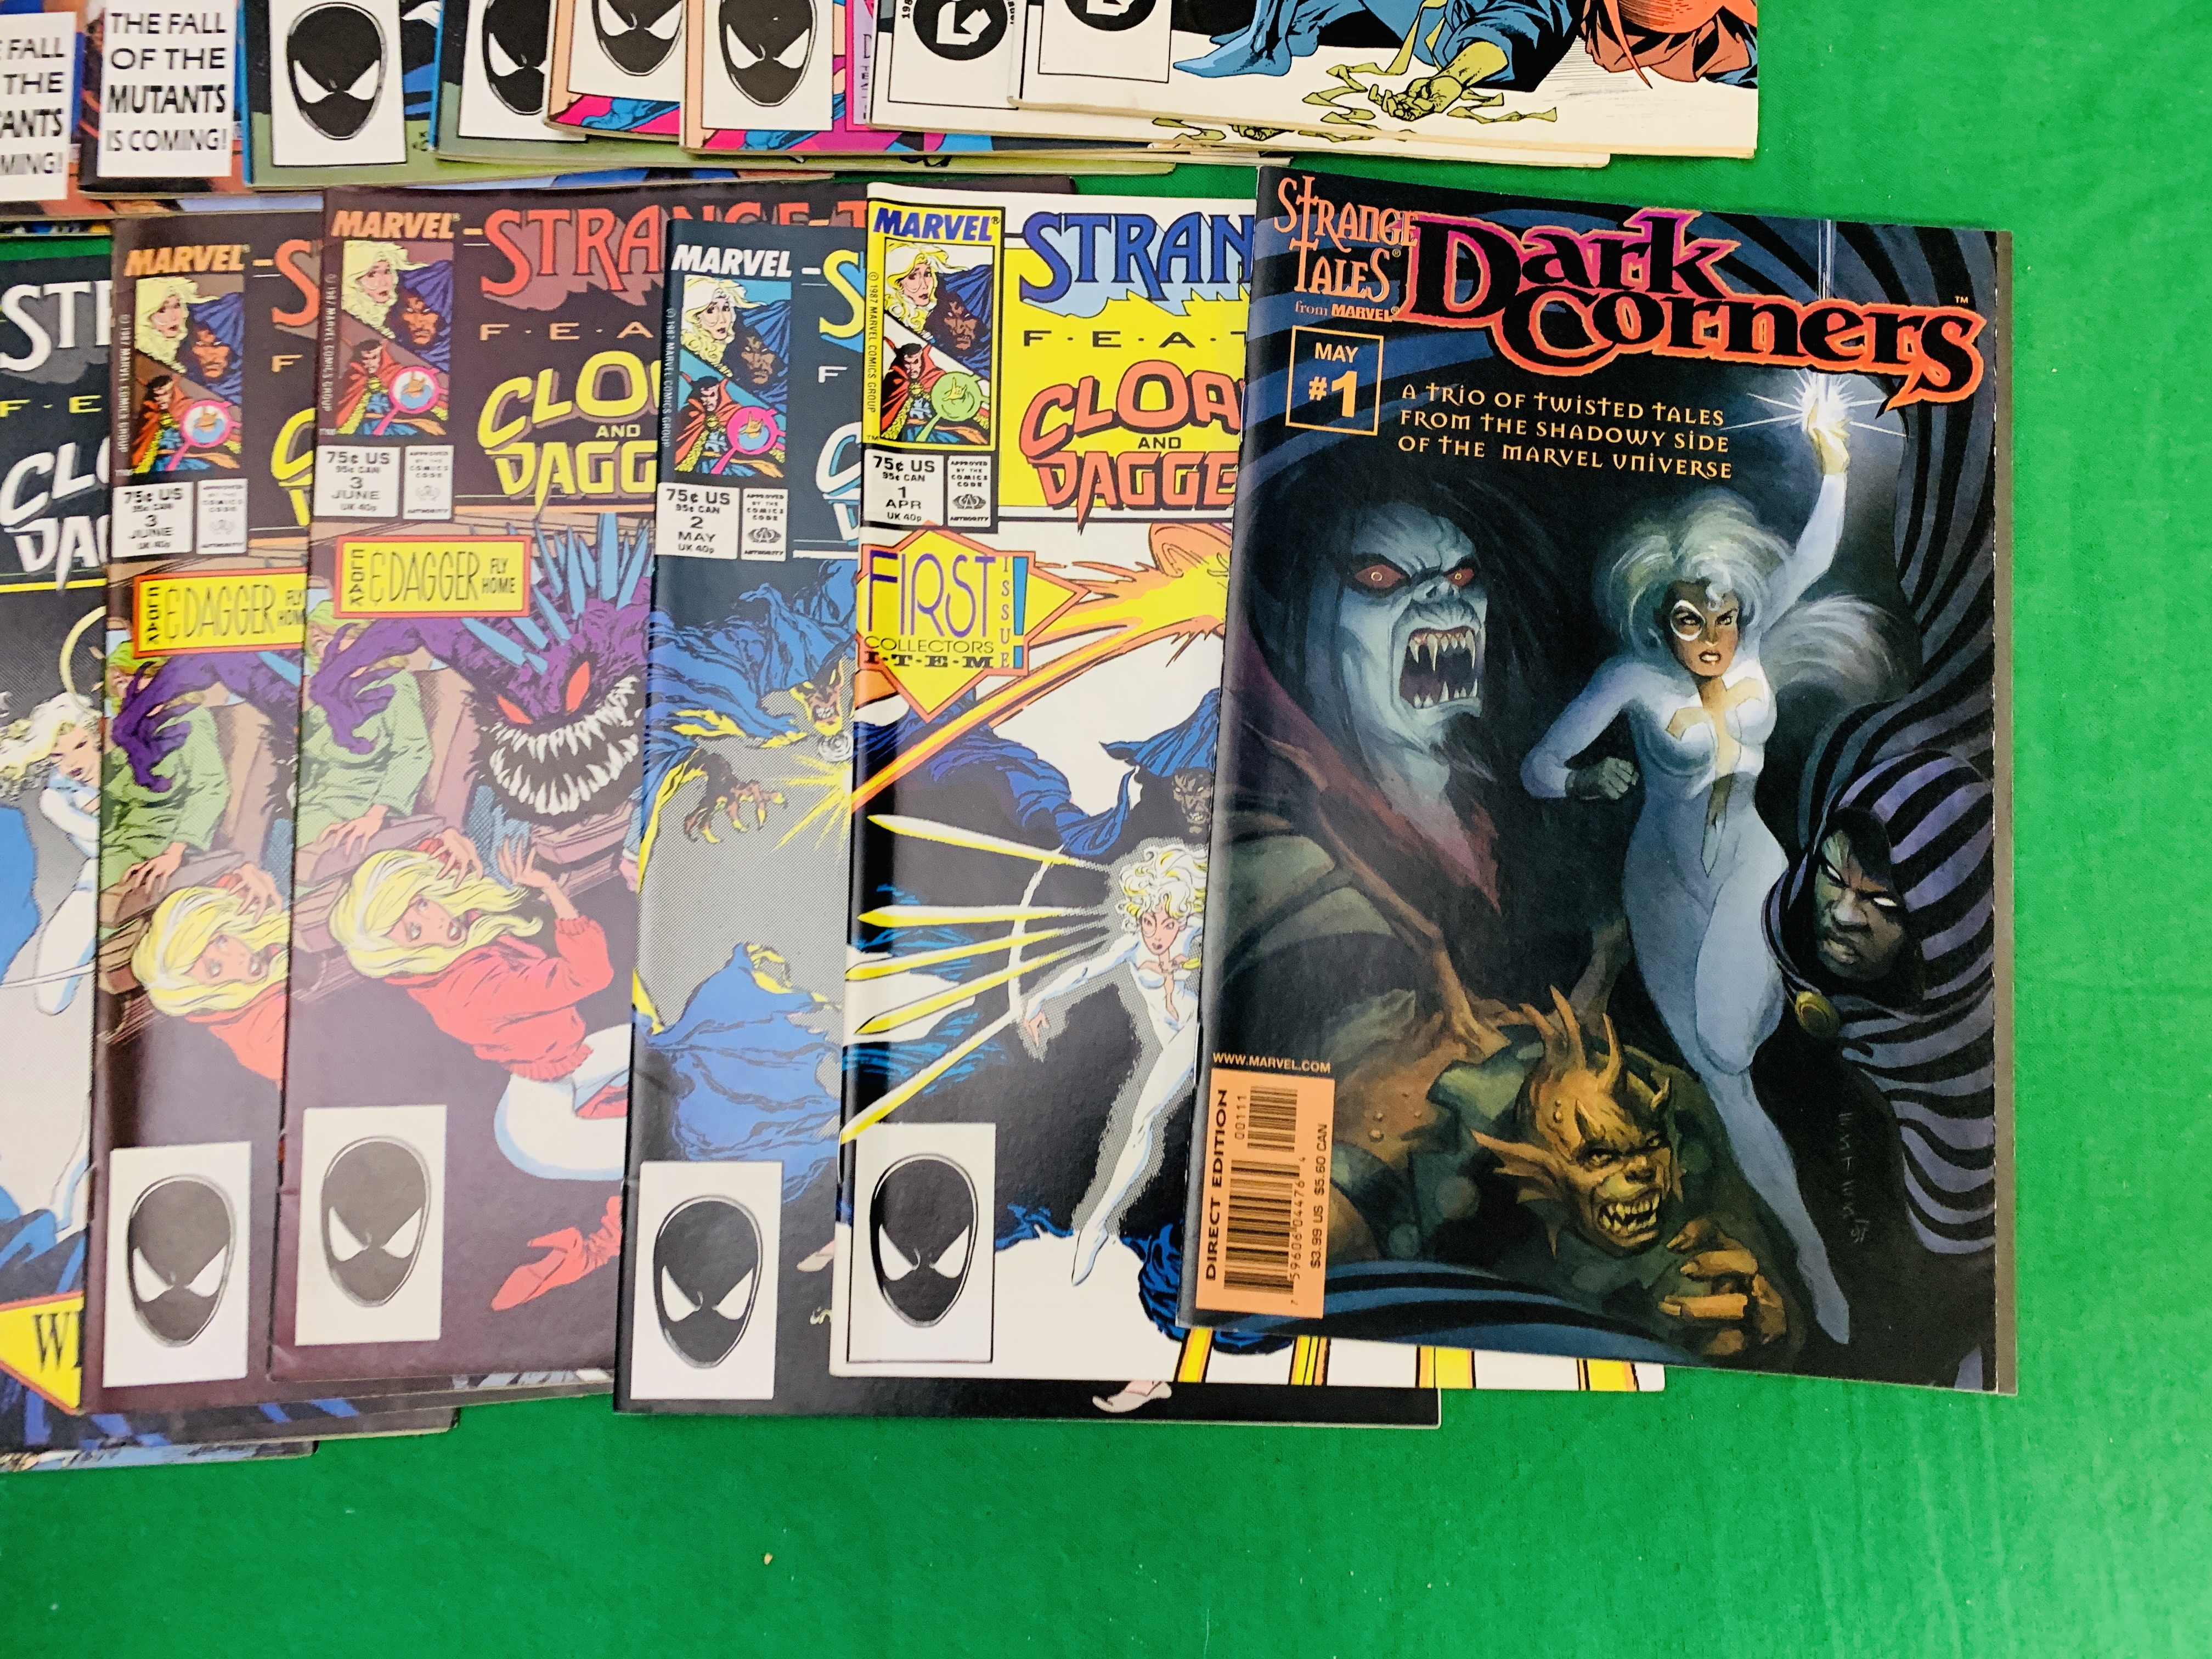 MARVEL STRANGE TALES, NO. 1 - 19, FROM 1987, SLIGHT RUSTING TO CORNERS OF STAPLES ON NO. 8 & 9. - Image 2 of 7